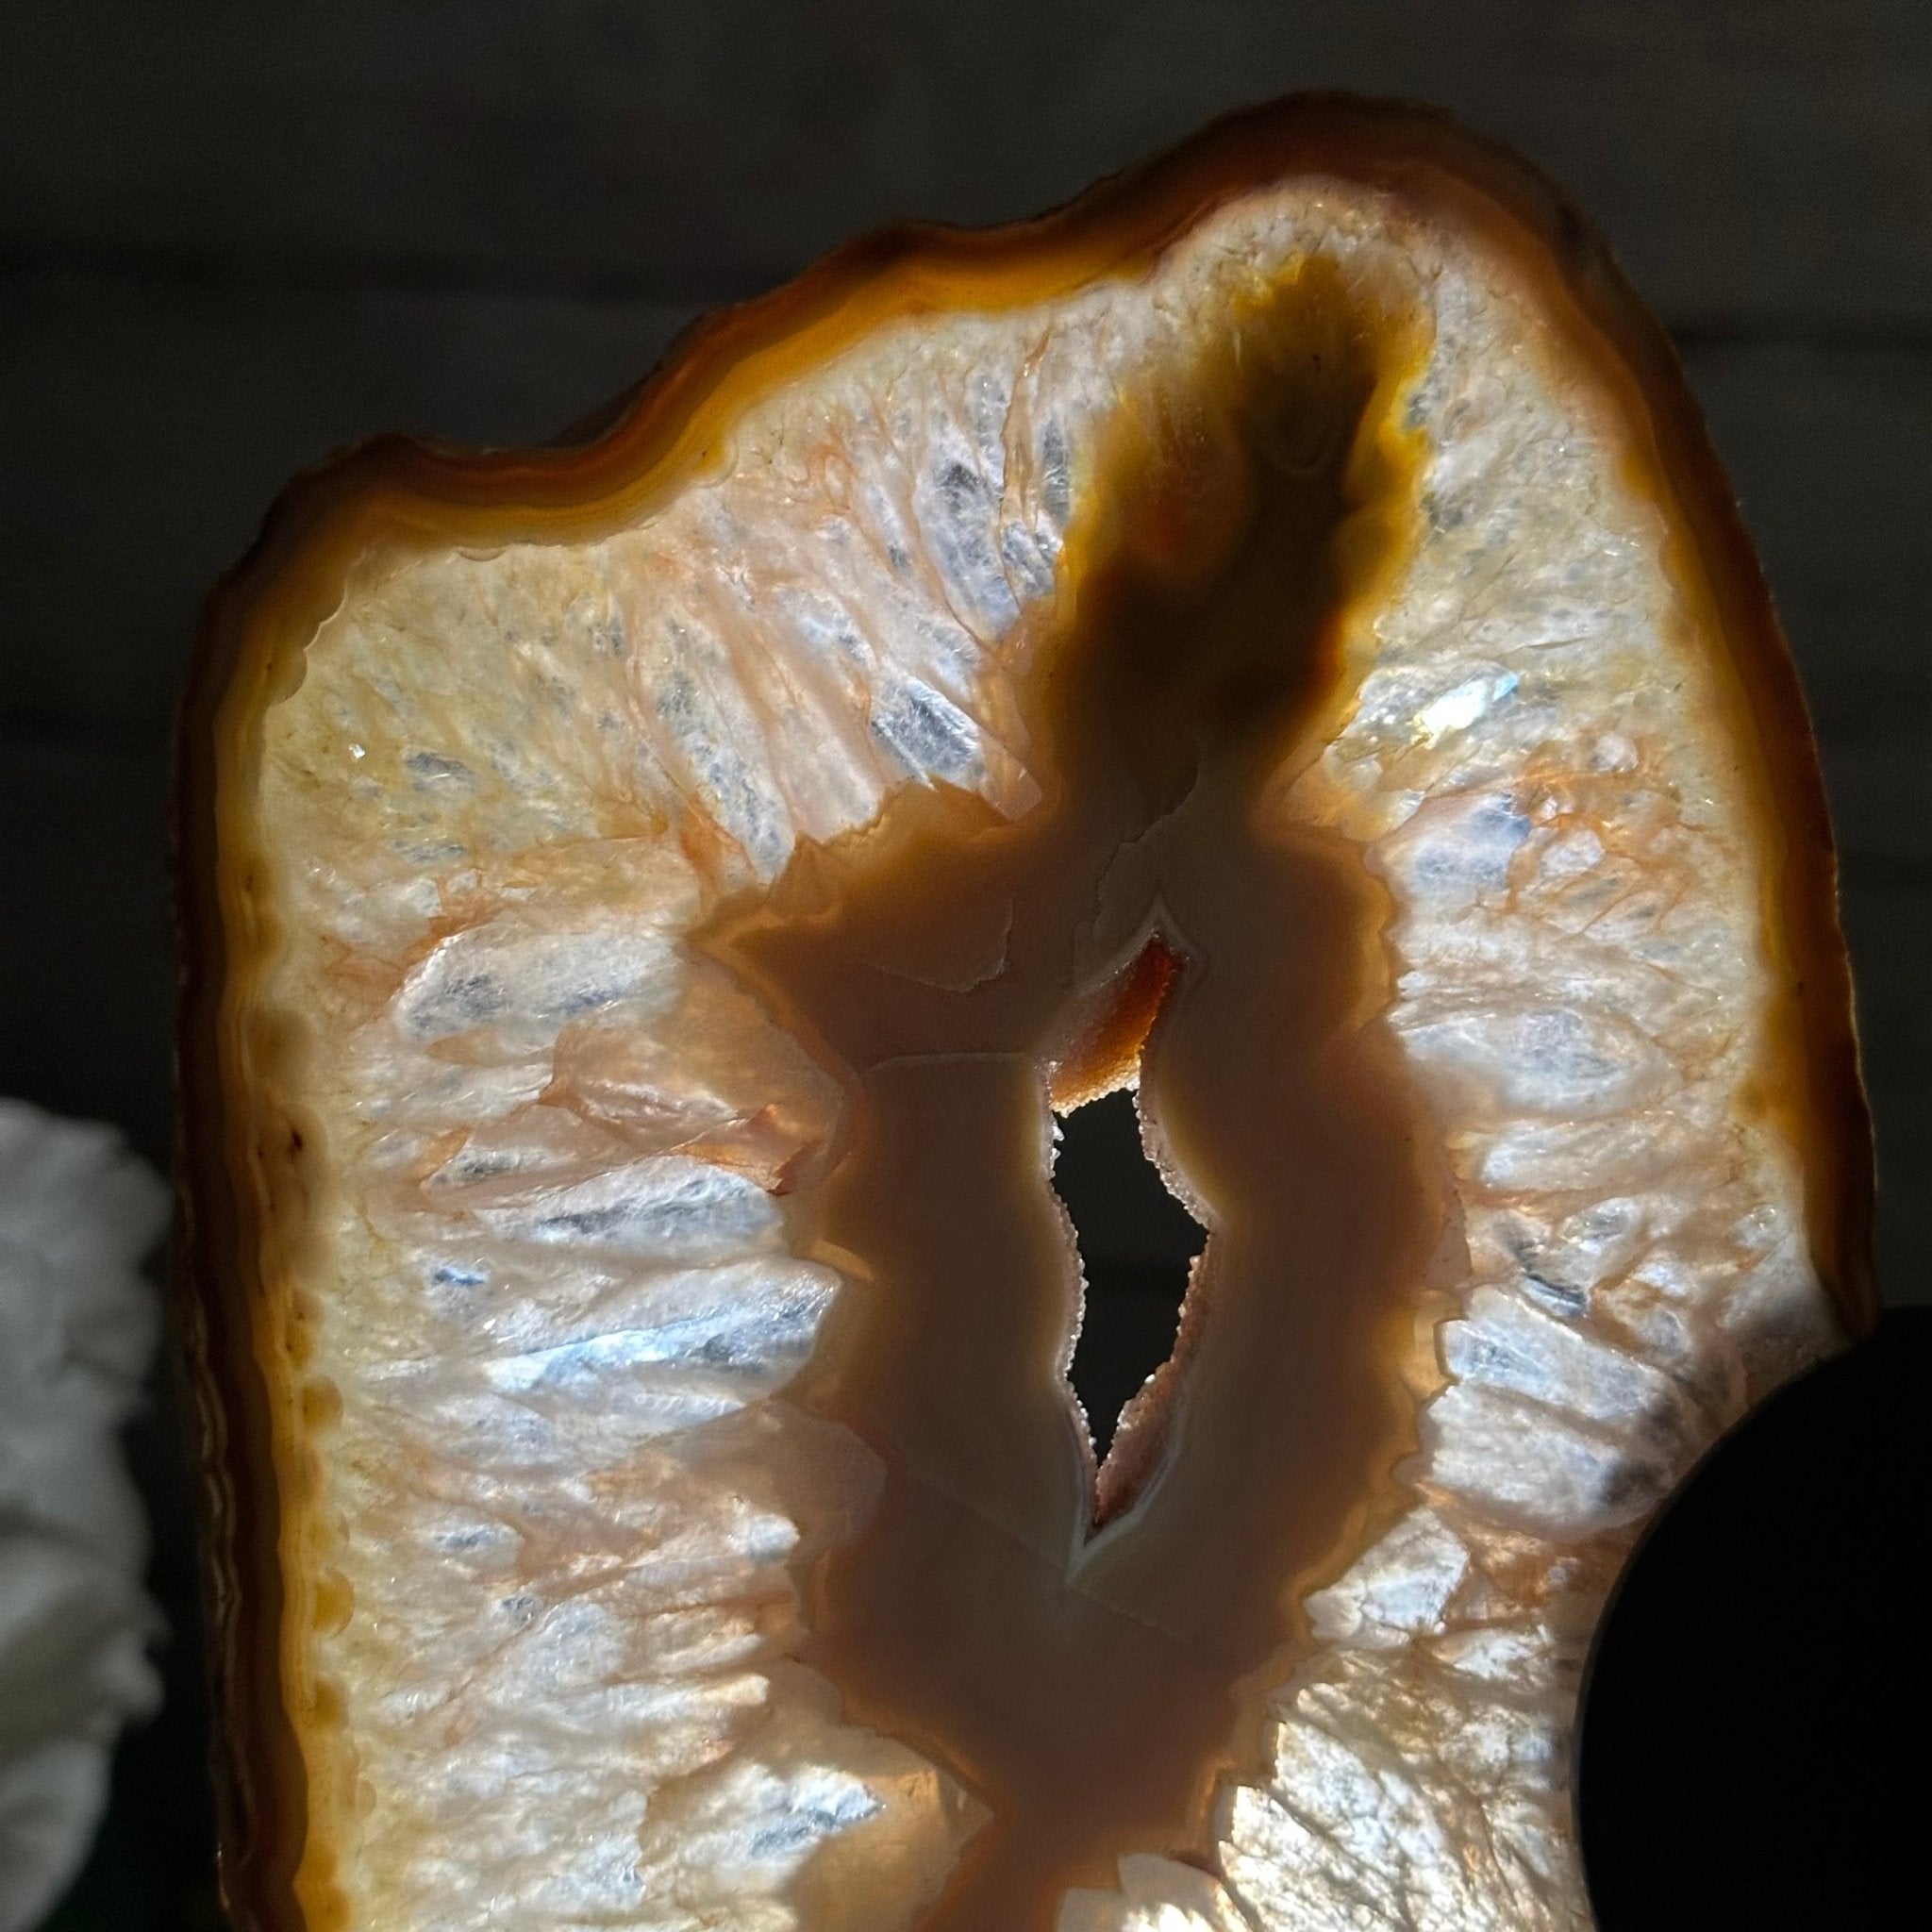 Natural Brazilian Agate "Butterfly Wings", 9.9" Tall #5050NA-116 - Brazil GemsBrazil GemsNatural Brazilian Agate "Butterfly Wings", 9.9" Tall #5050NA-116Agate Butterfly Wings5050NA-116